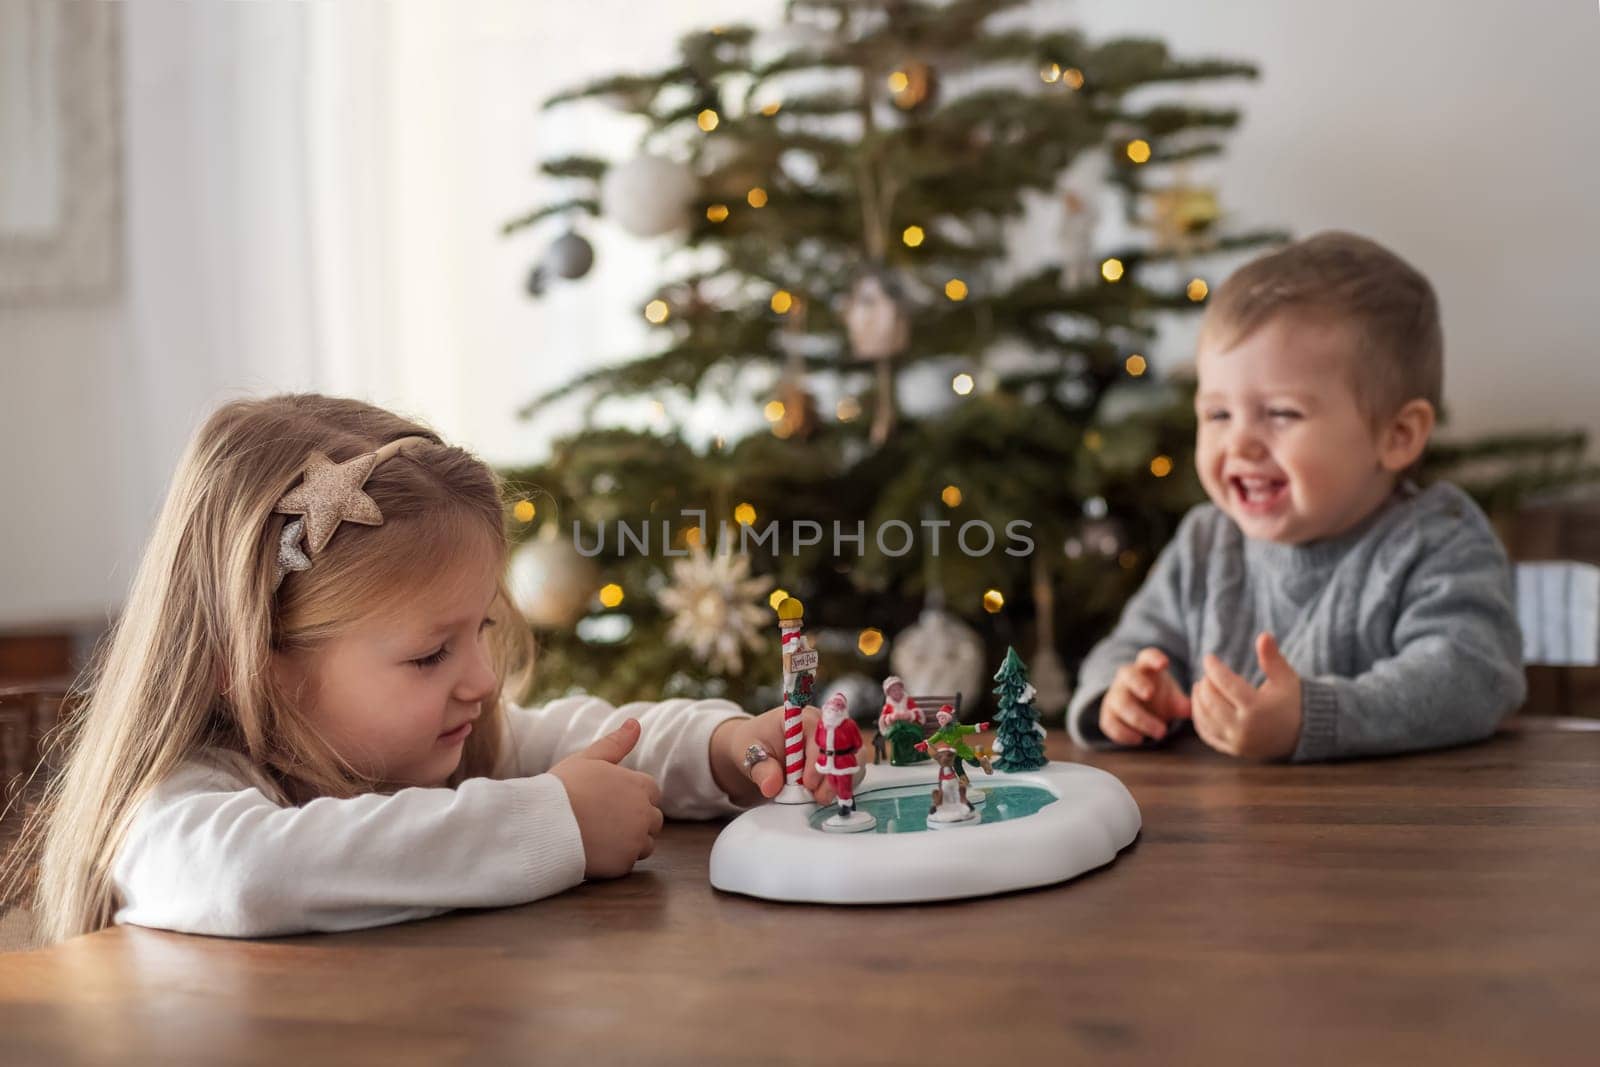 Sister and brother play with ceramic figures for Christmas